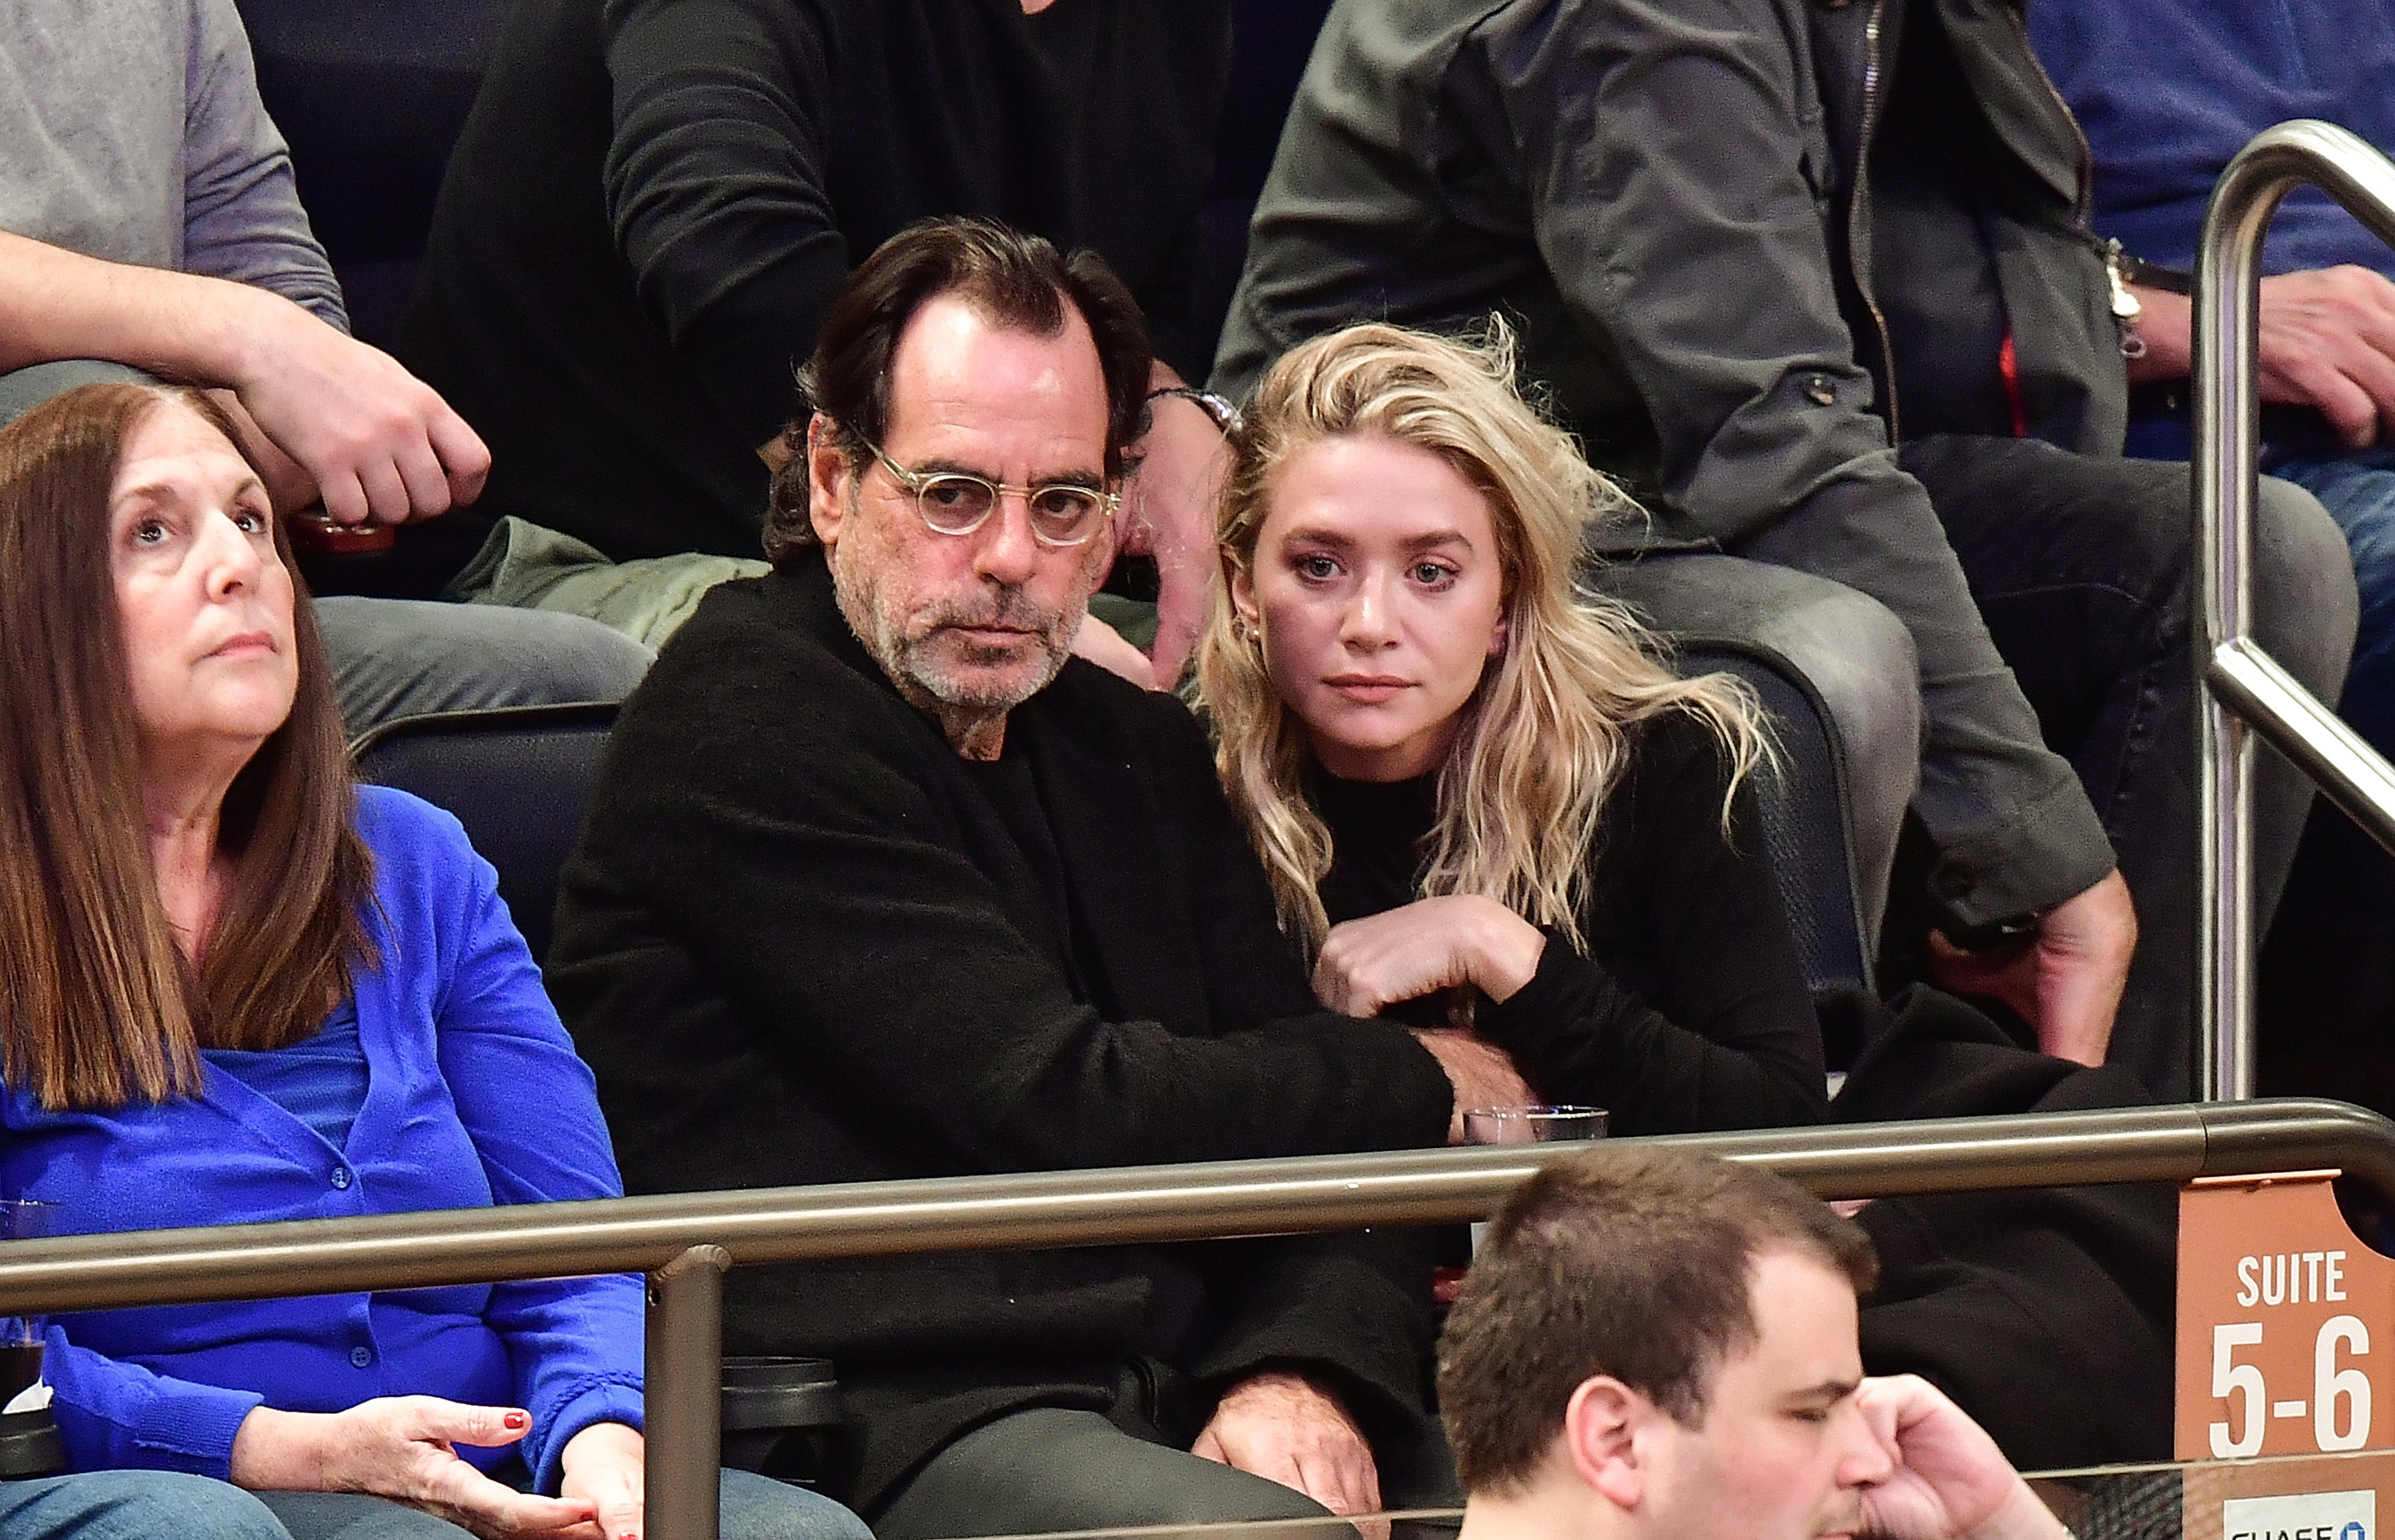 <p>Richard Sachs is 28 years older than <a href="https://www.wonderwall.com/celebrity/profiles/overview/ashley-olsen-238.article">Ashley Olsen</a>, but that didn't stop them from kissing at a New York Knicks game at Madison Square Garden in New York City in November 2016. The two dated for five months before splitting in March 2017.</p>